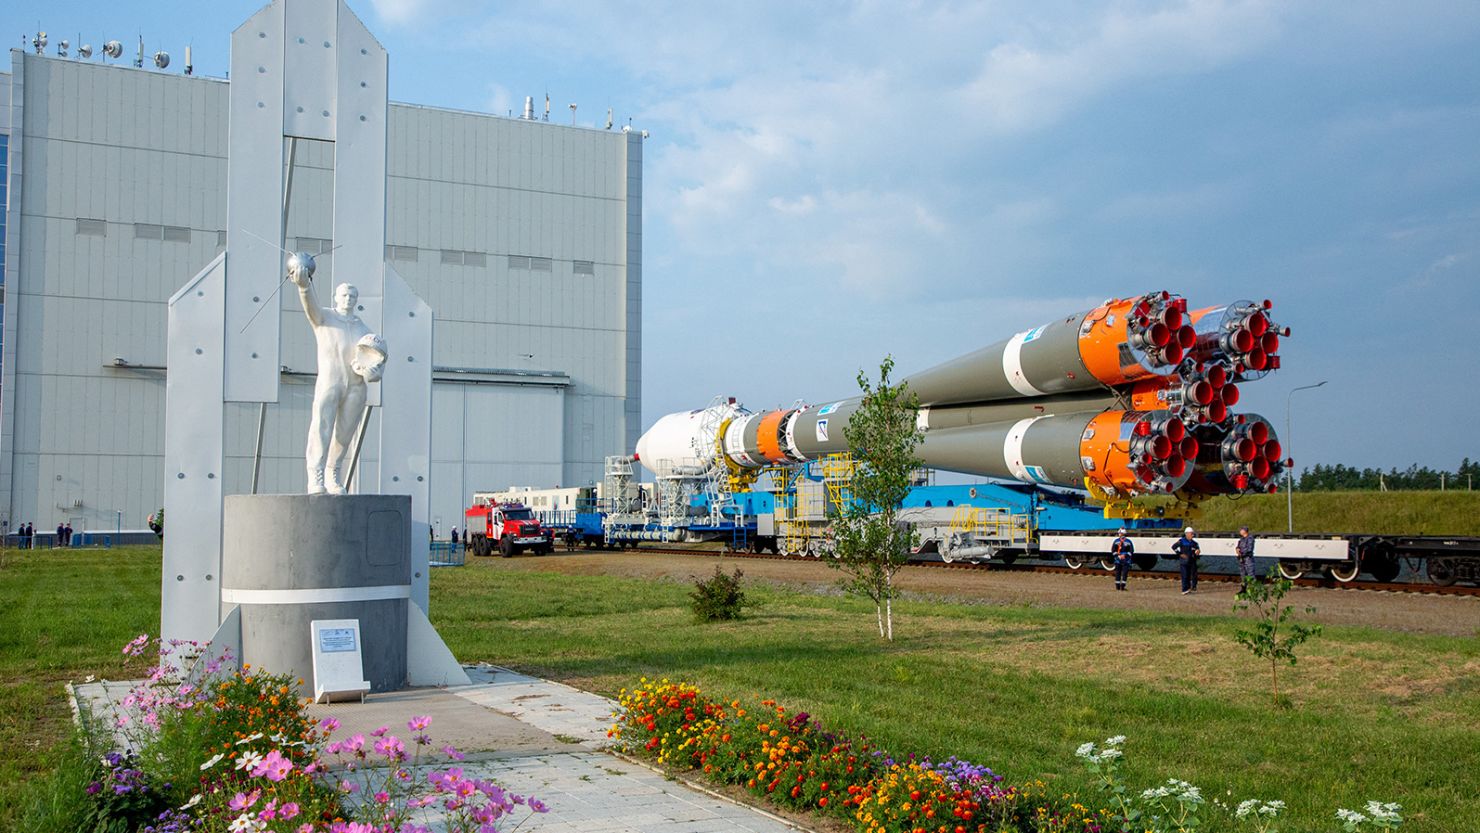 The Soyuz-2.1b rocket booster with the lunar landing spacecraft Luna-25 is rolled out onto the launchpad ahead of its upcoming launch at the Vostochny Cosmodrome in the Amur region, Russia, August 8, 2023. Roscosmos/Handout via REUTERS ATTENTION EDITORS - THIS IMAGE HAS BEEN SUPPLIED BY A THIRD PARTY. MANDATORY CREDIT.